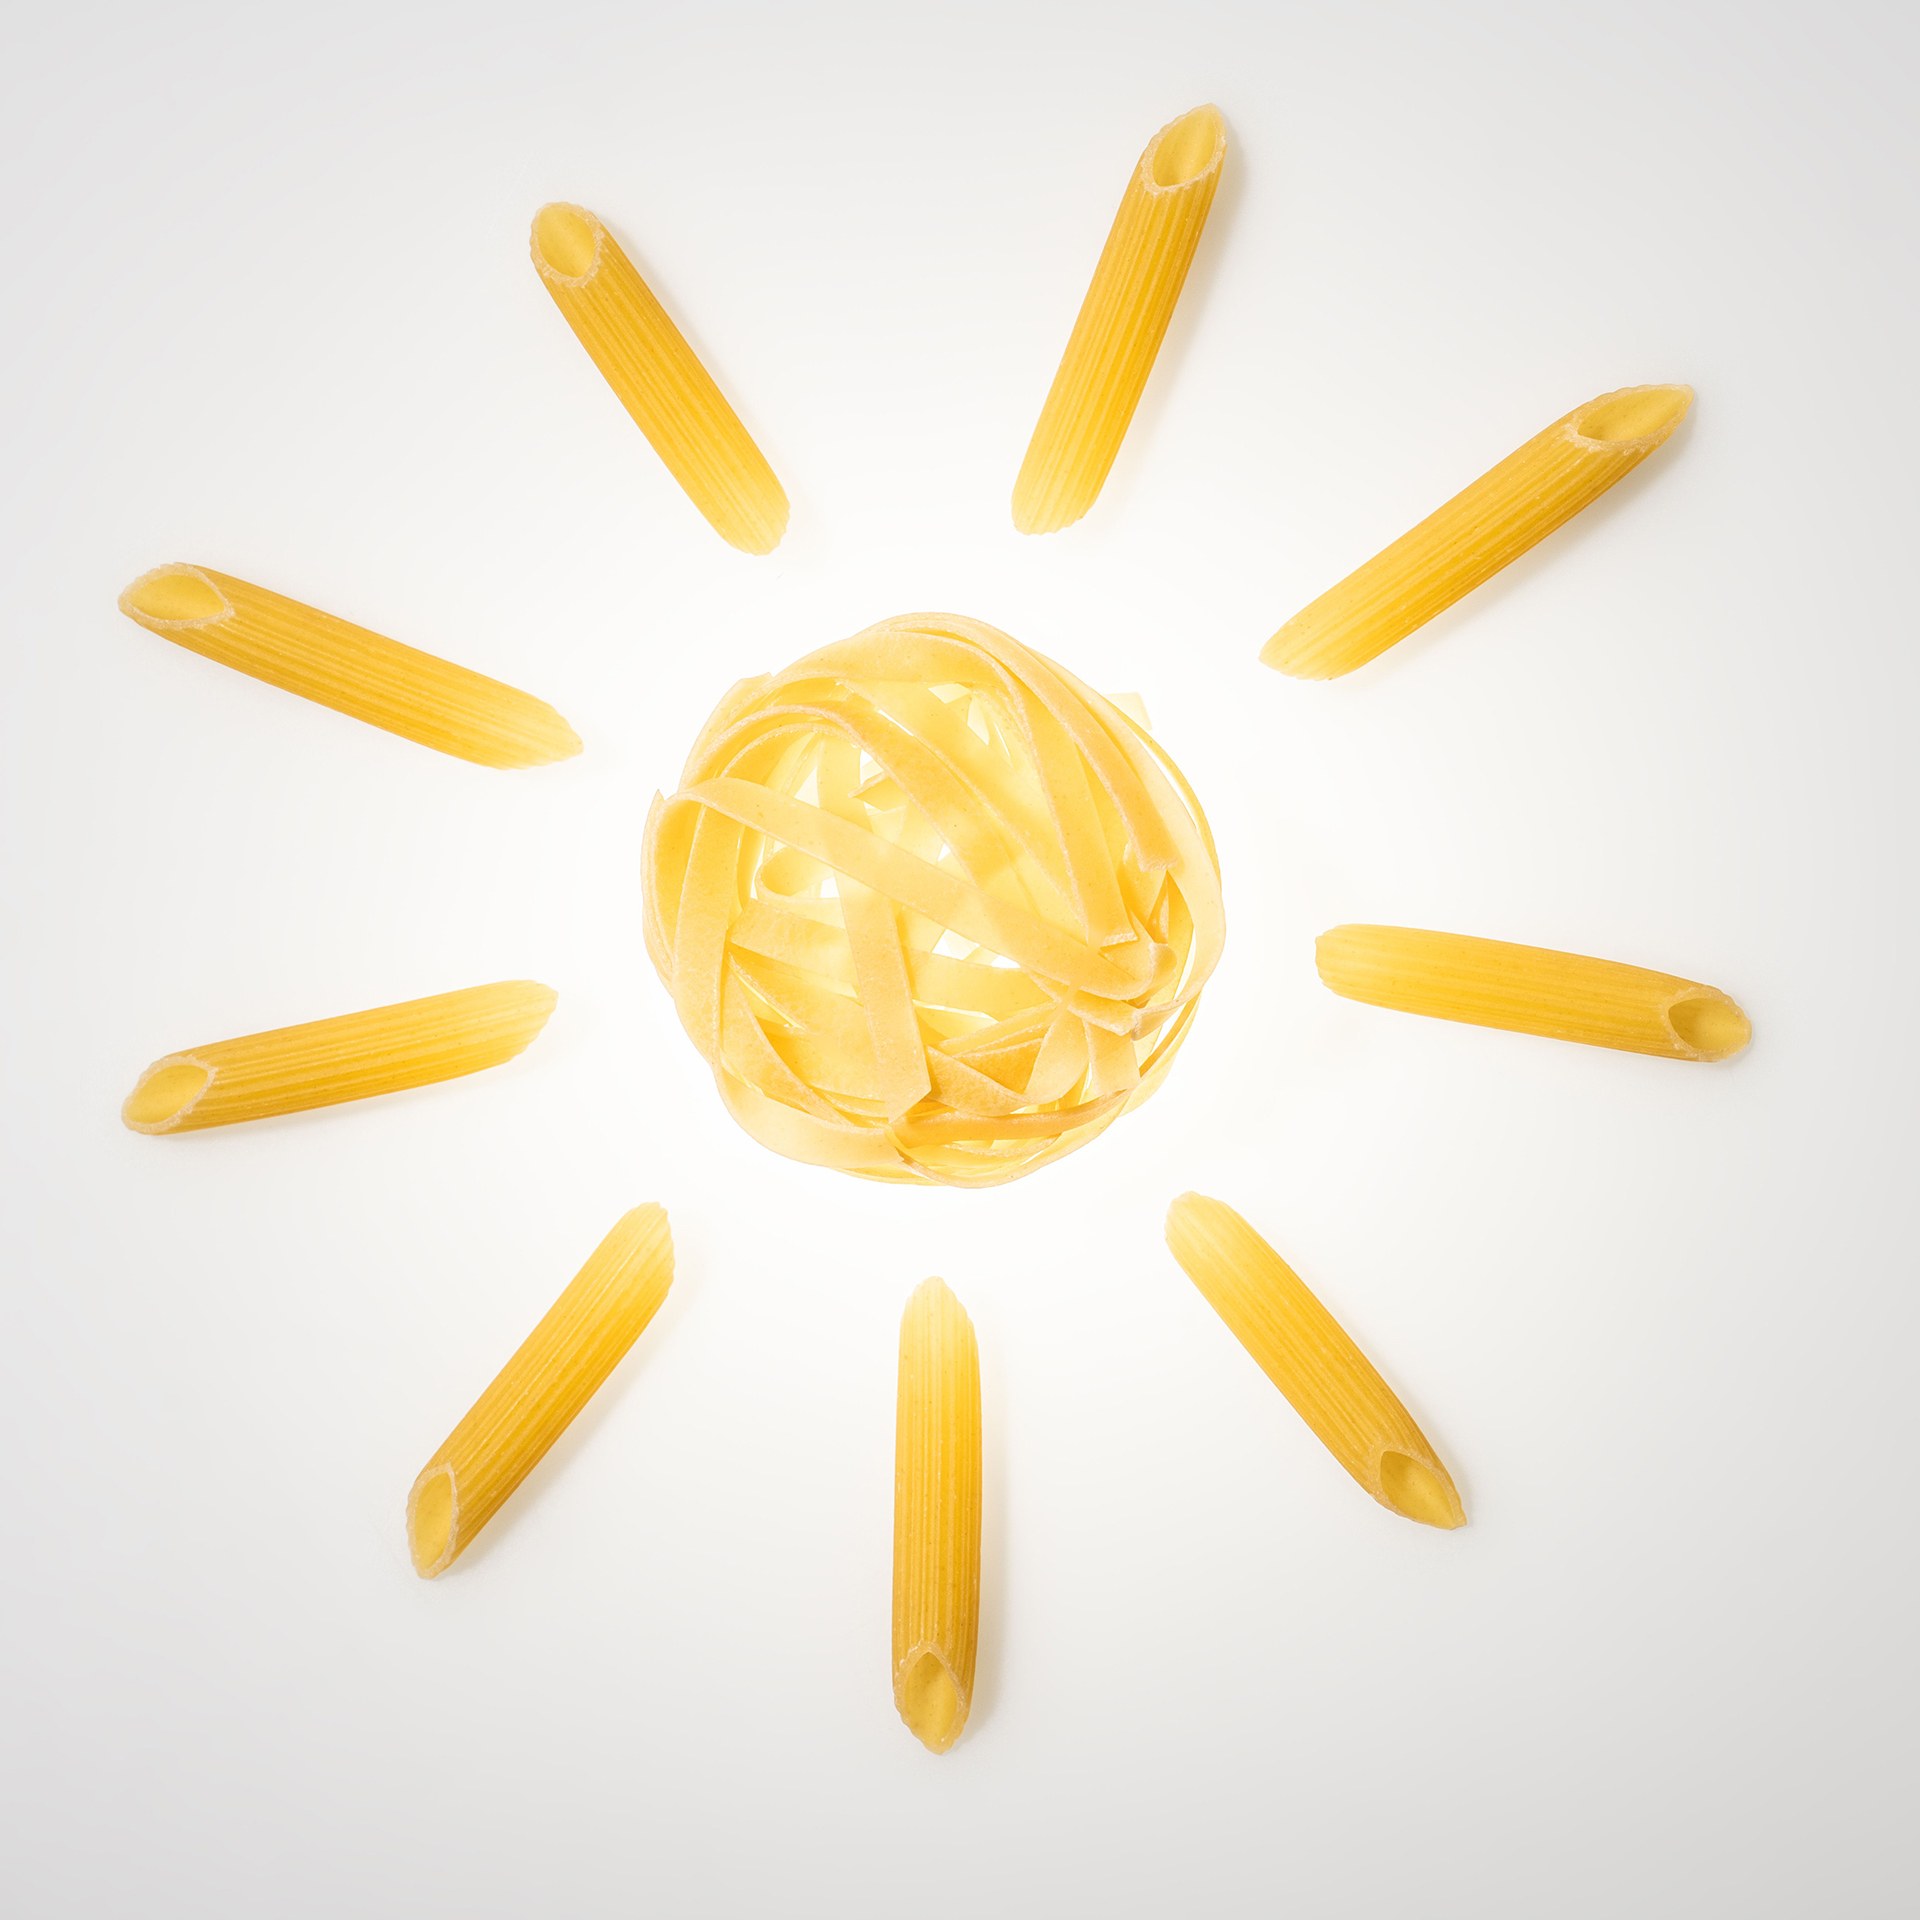 Solar power for sustainable pasta